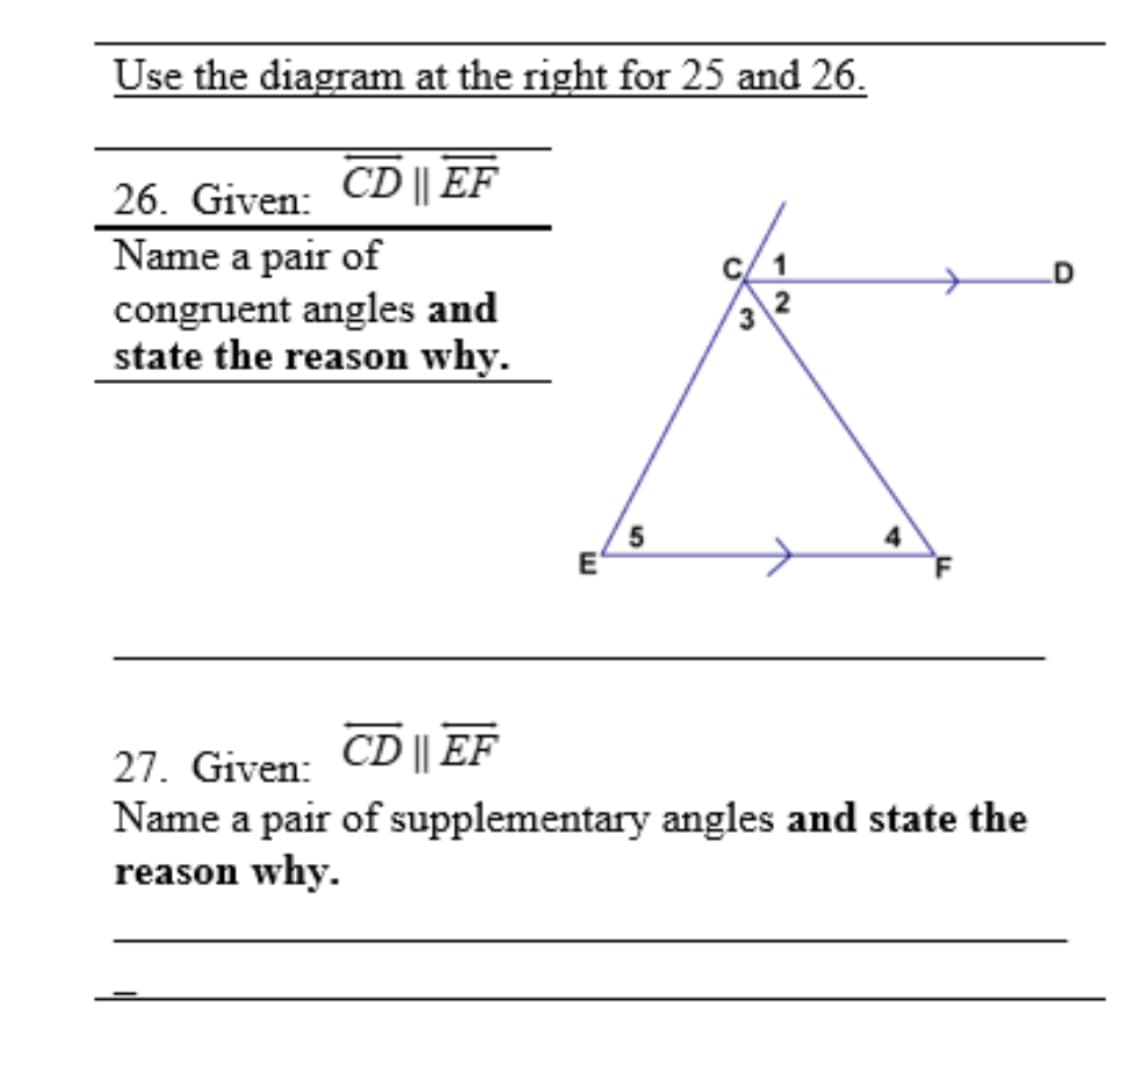 Use the diagram at the right for 25 and 26.
26. Given: CD || EF
Name a pair of
congruent angles and
state the reason why.
3
2
E
CD || EF
27. Given:
Name a pair of supplementary angles and state the
reason why.
